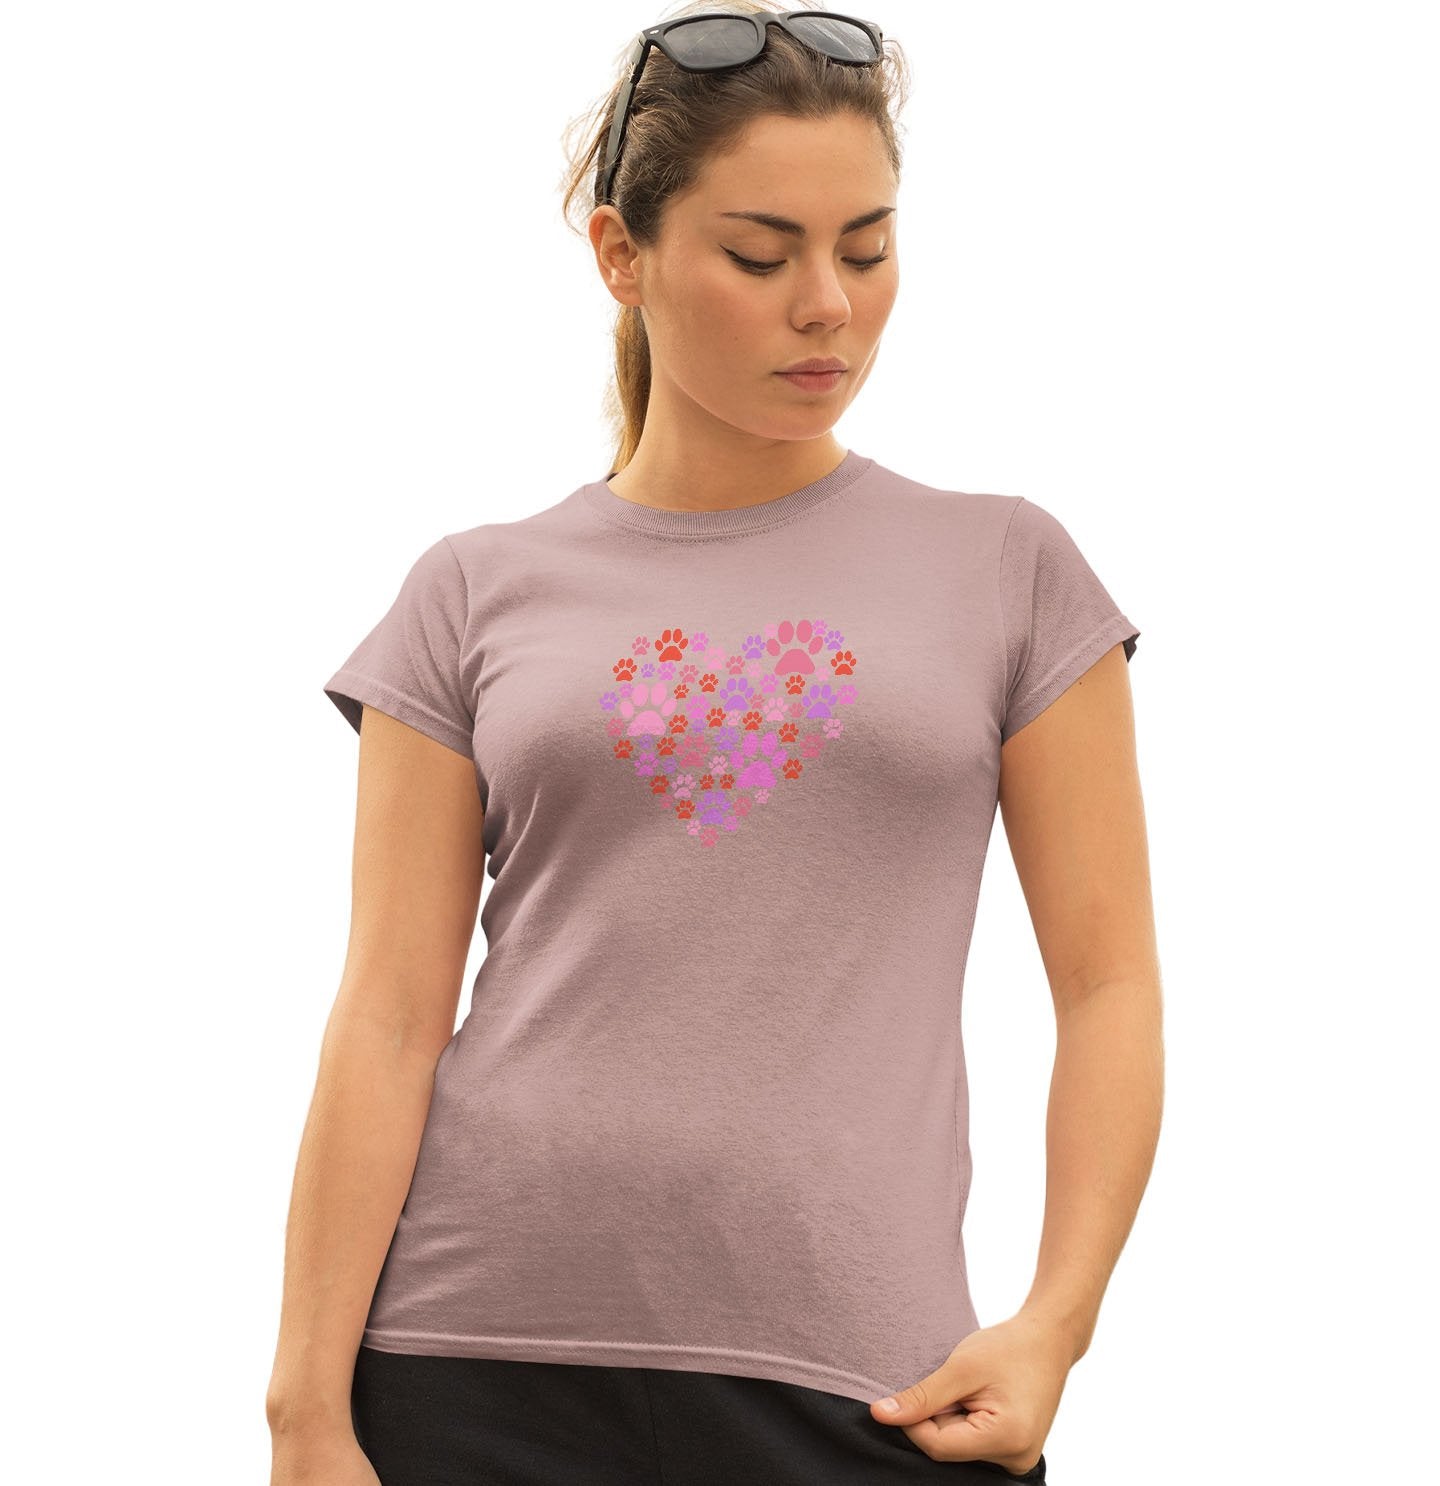 Pink Paw Heart Ladies' Fitted Shirt